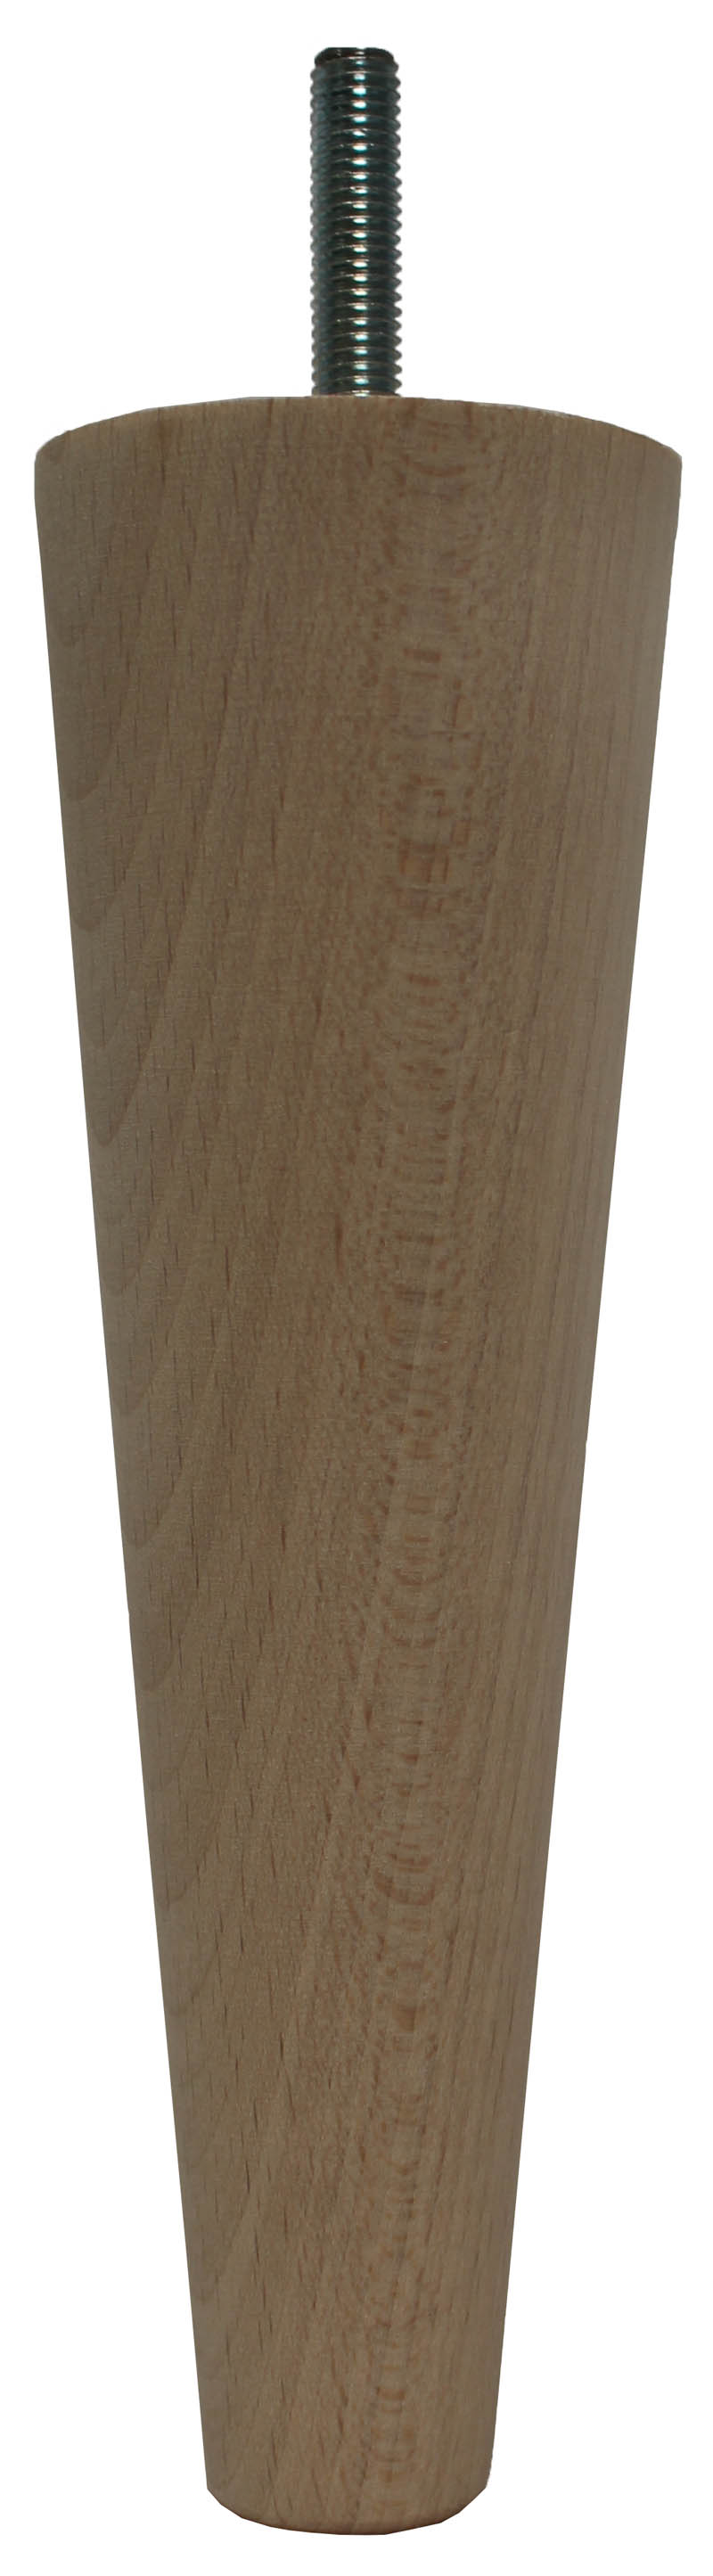 Hasna Tapered Furniture Legs - Raw Finish - Set of 4